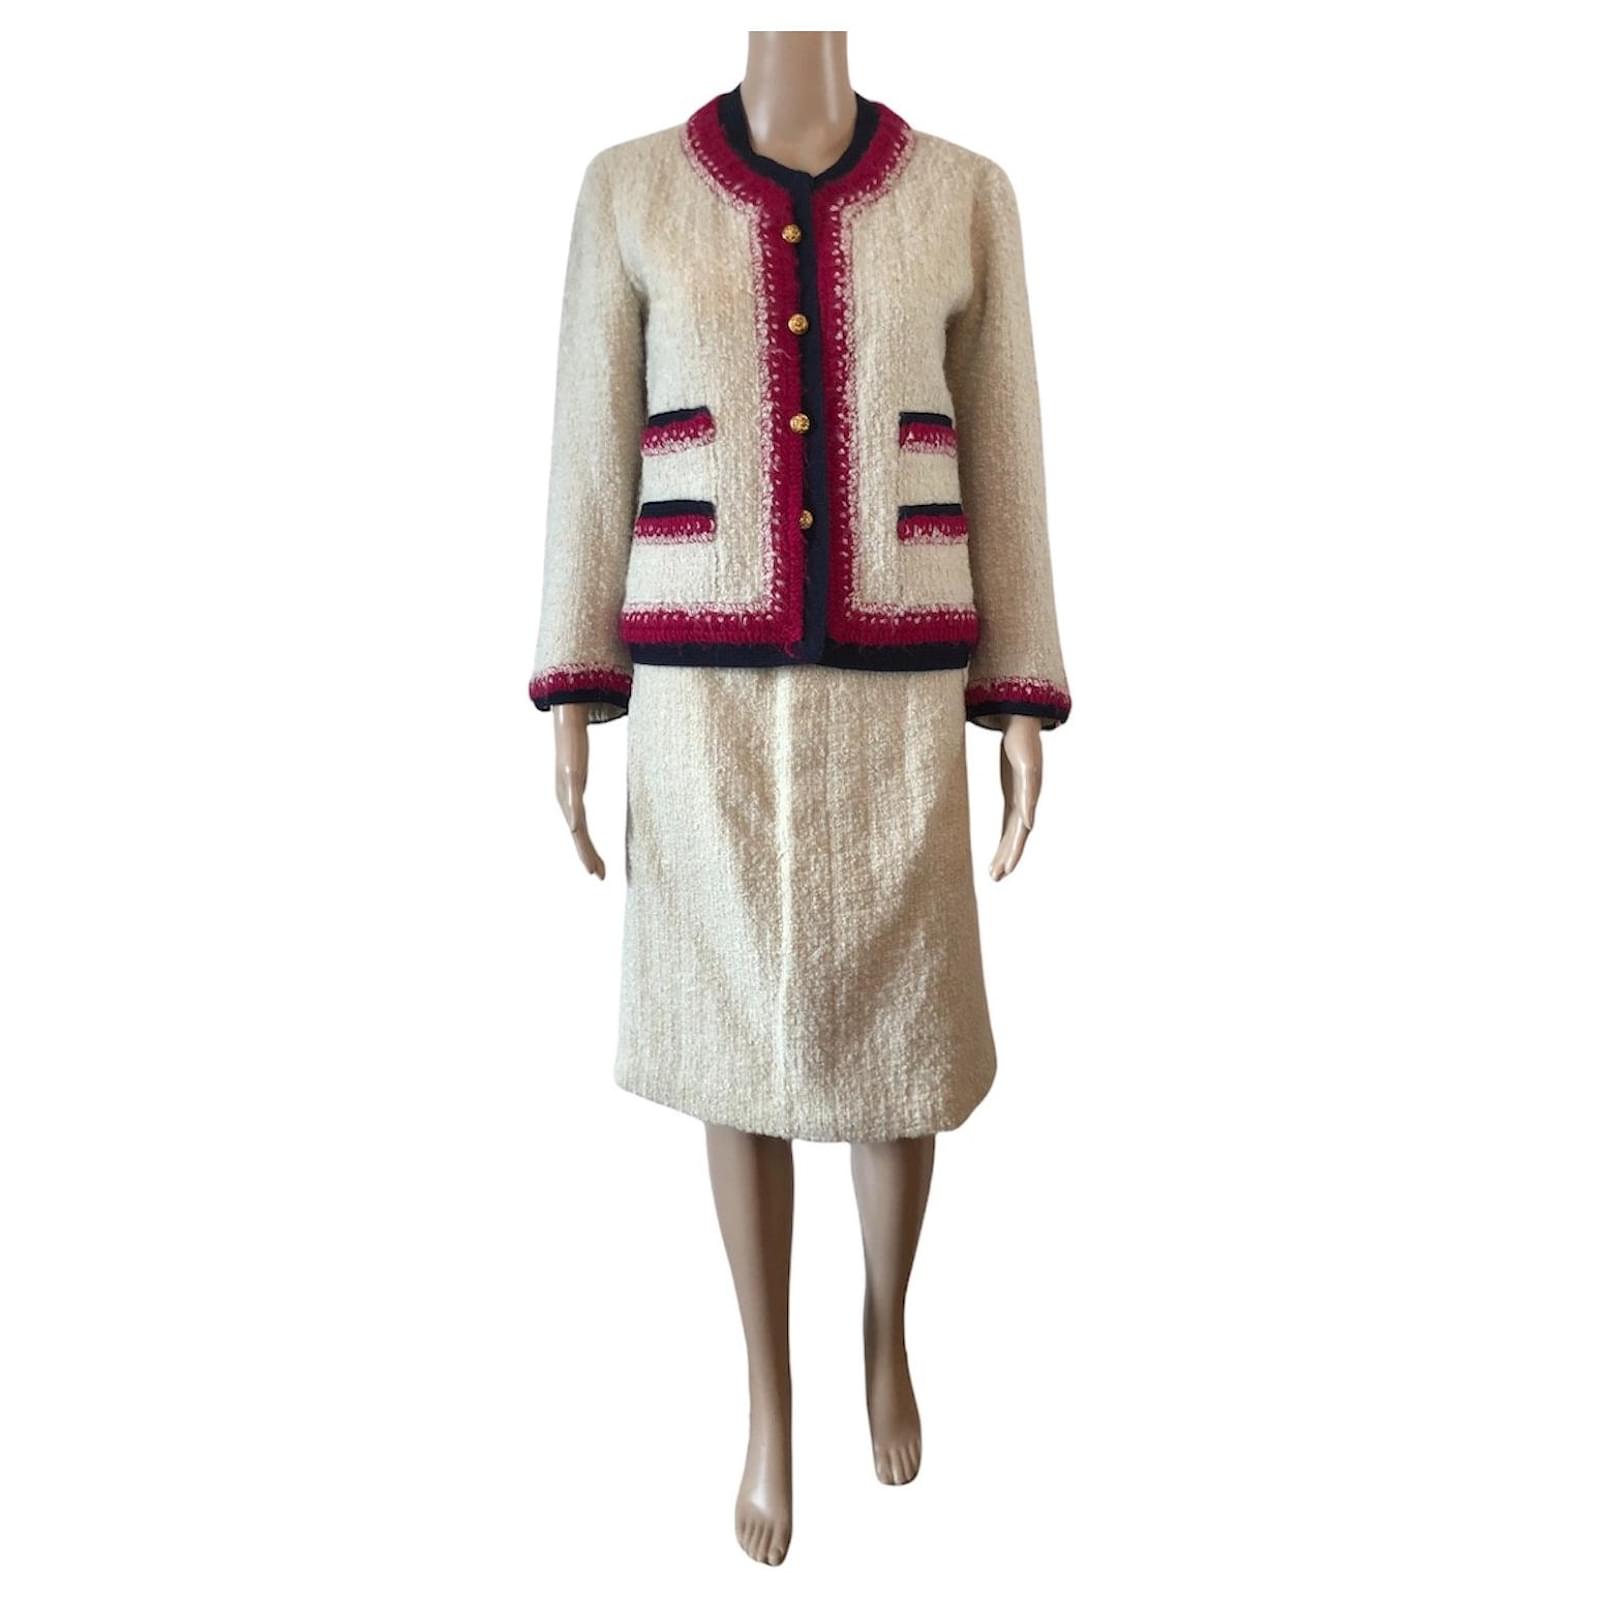 A Coco Chanel Bouclé Wool Suit with Scarf, with a Coco Chanel Silk